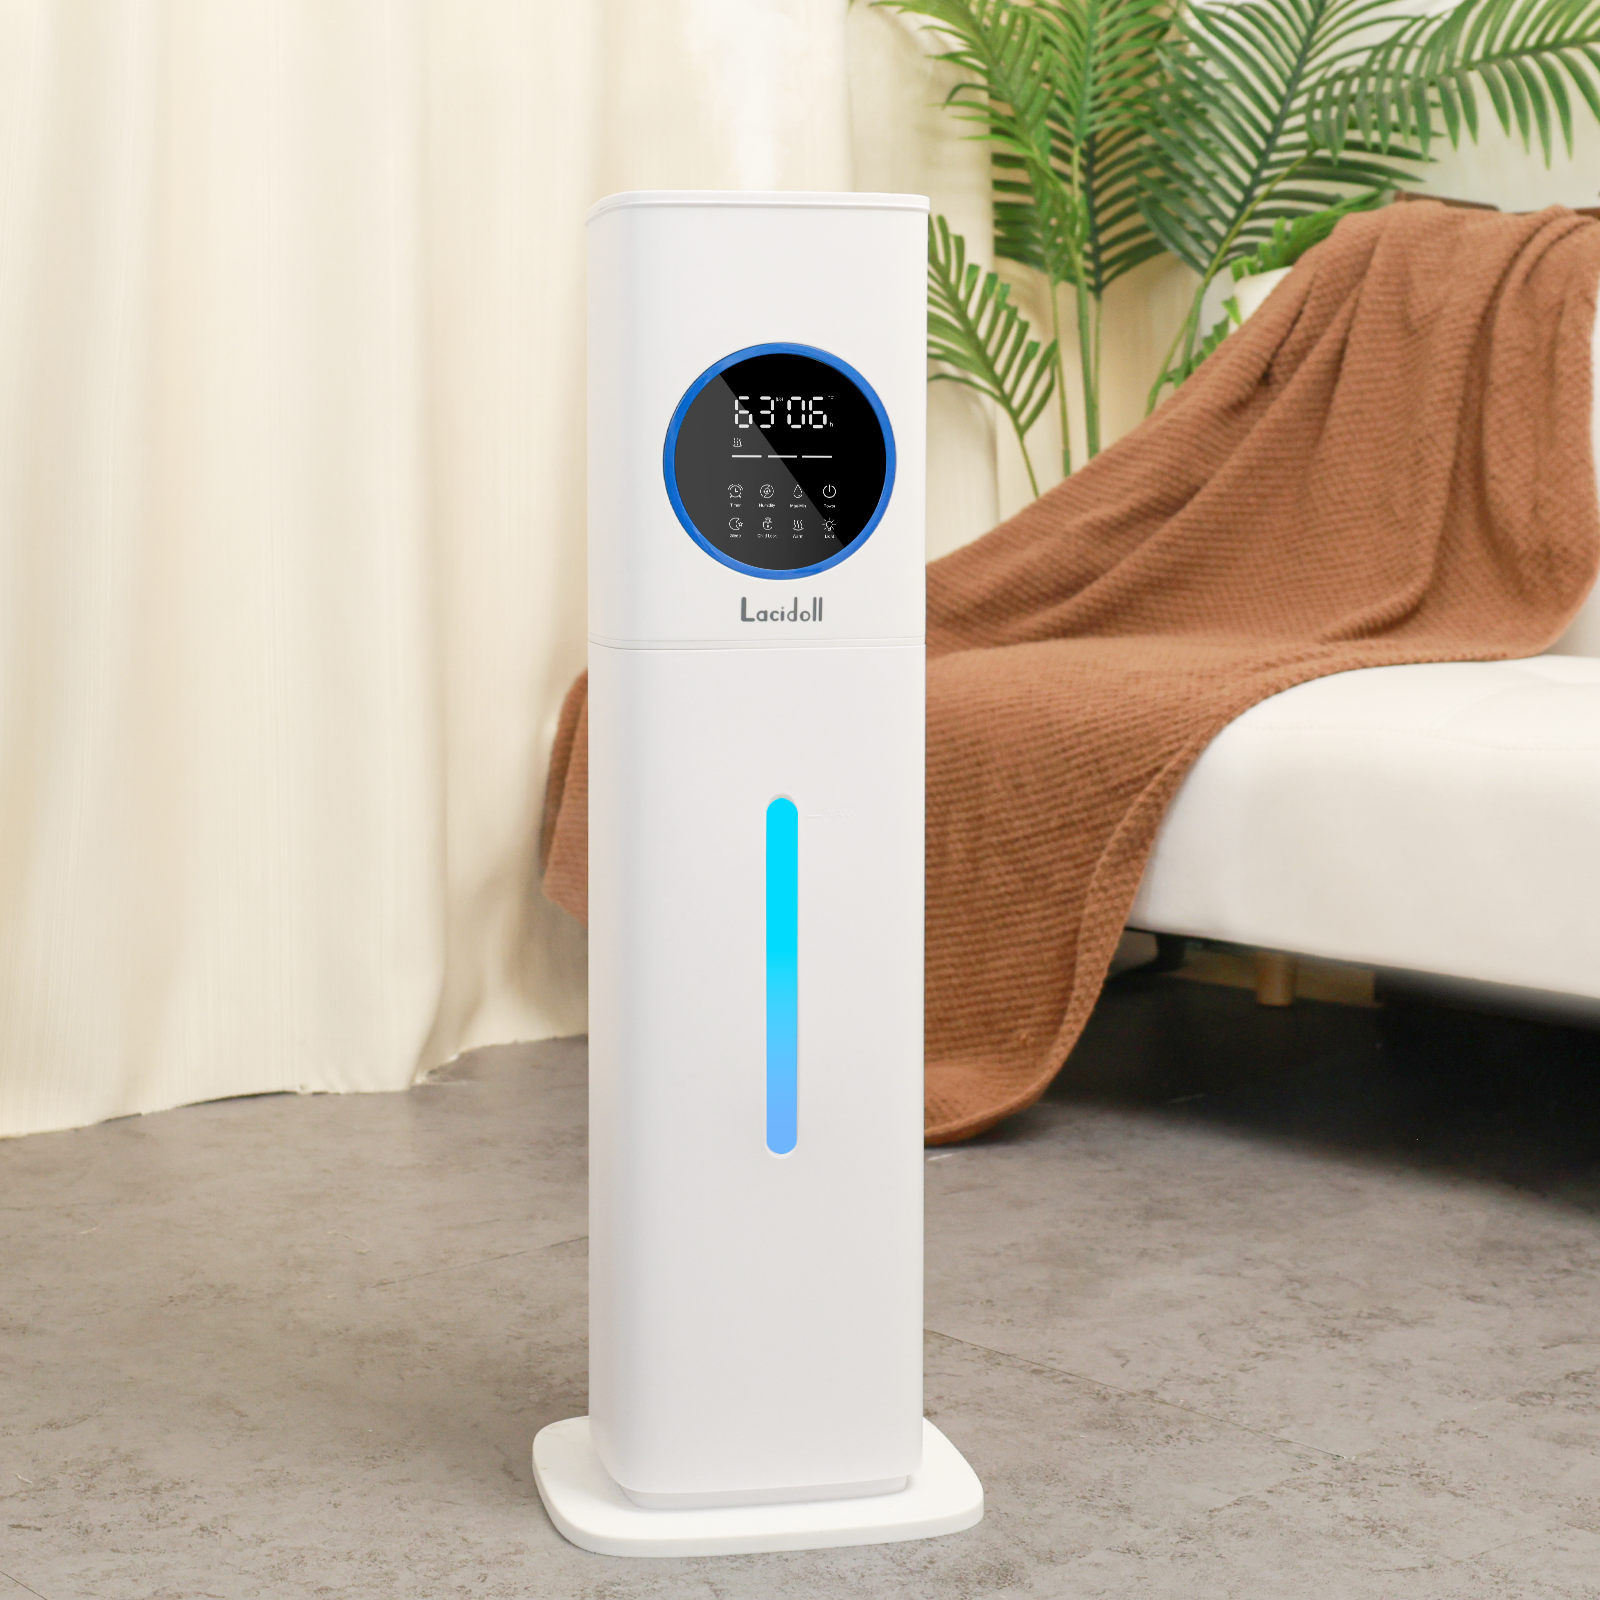 LACIDOLL Warm and Cool Mist Humidifiers for Bedroom Home, 2.1gal Quiet Humidifier for Large Room up to 500 ft with Customized Humidity, Night Light, Easy Top Fill, 12H Timer, Essential Oil, Child Lock